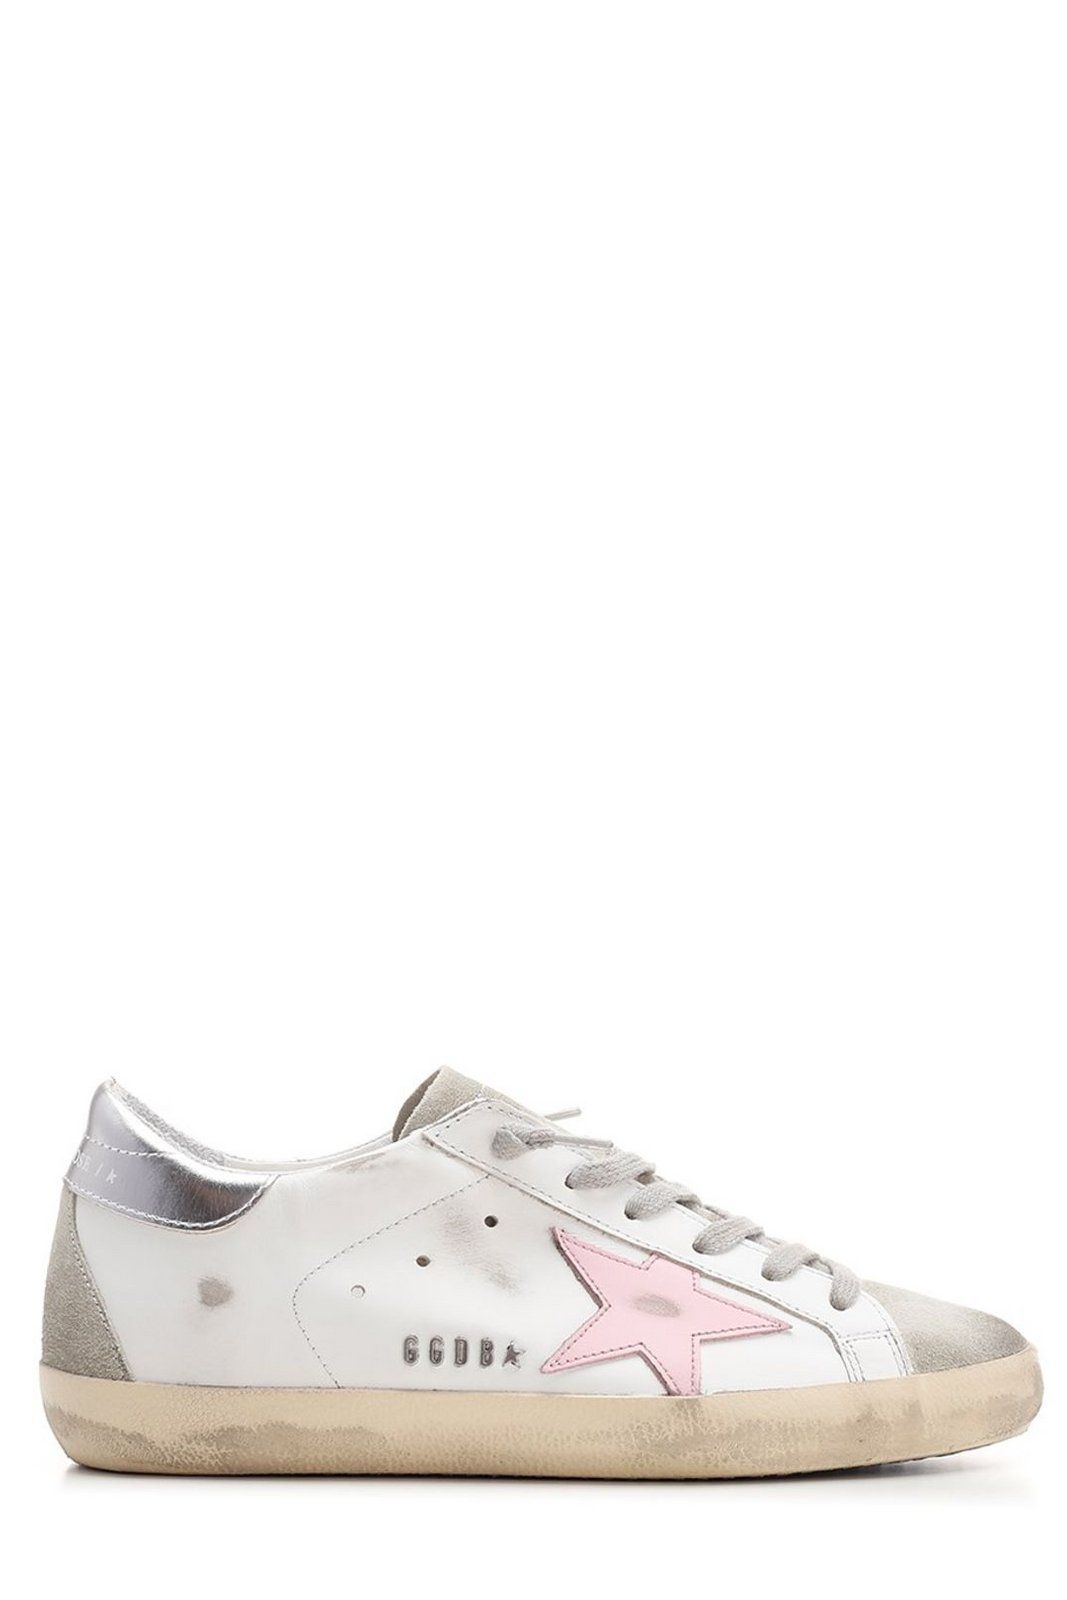 Golden Goose Deluxe Brand Star Patch Distressed Effect Sneakers | Cettire Global